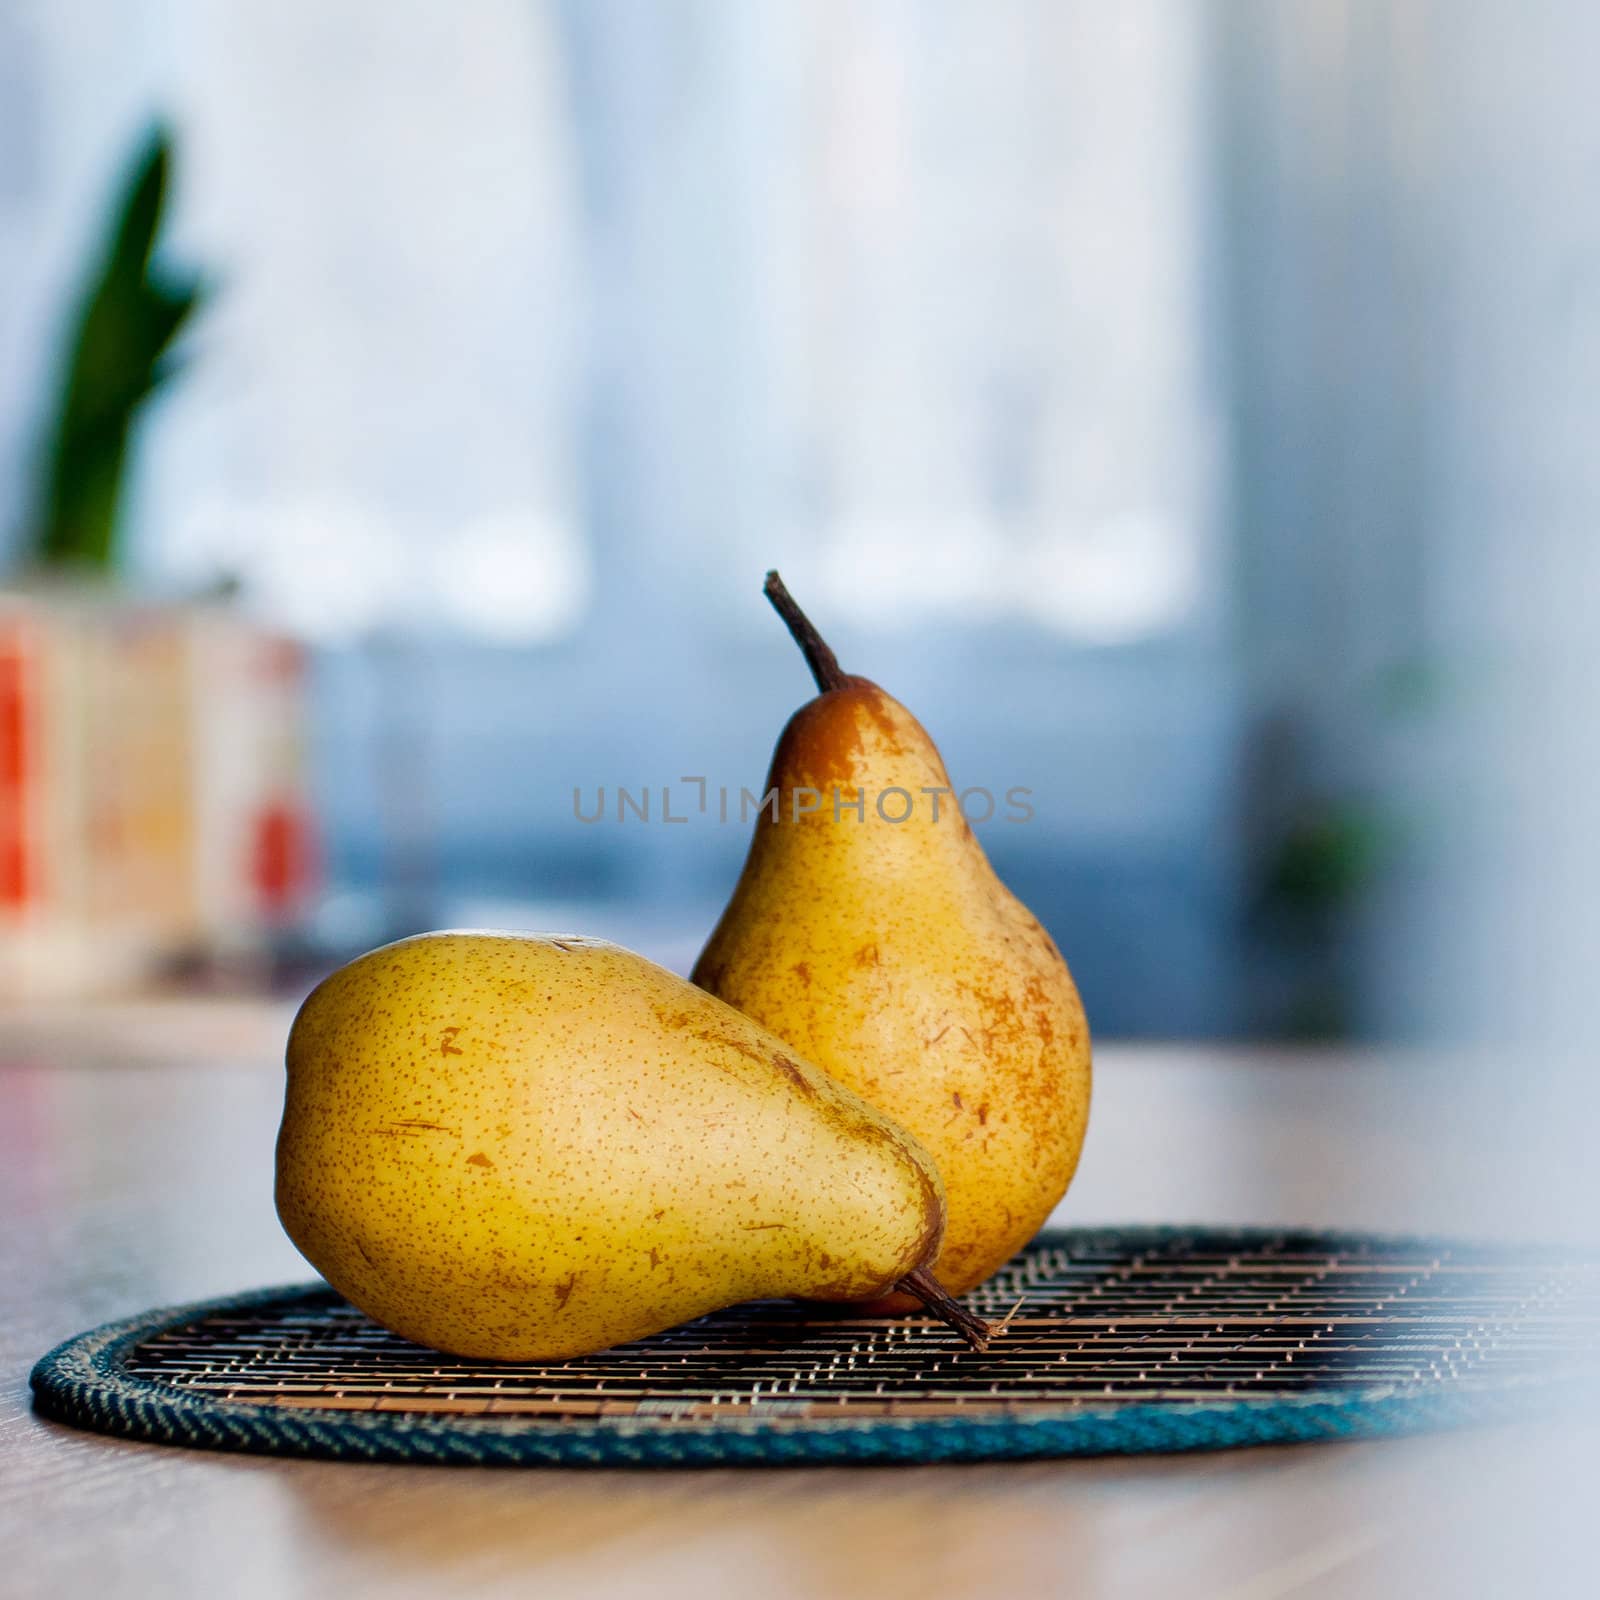 Two natural pears on the table to the breakfast.